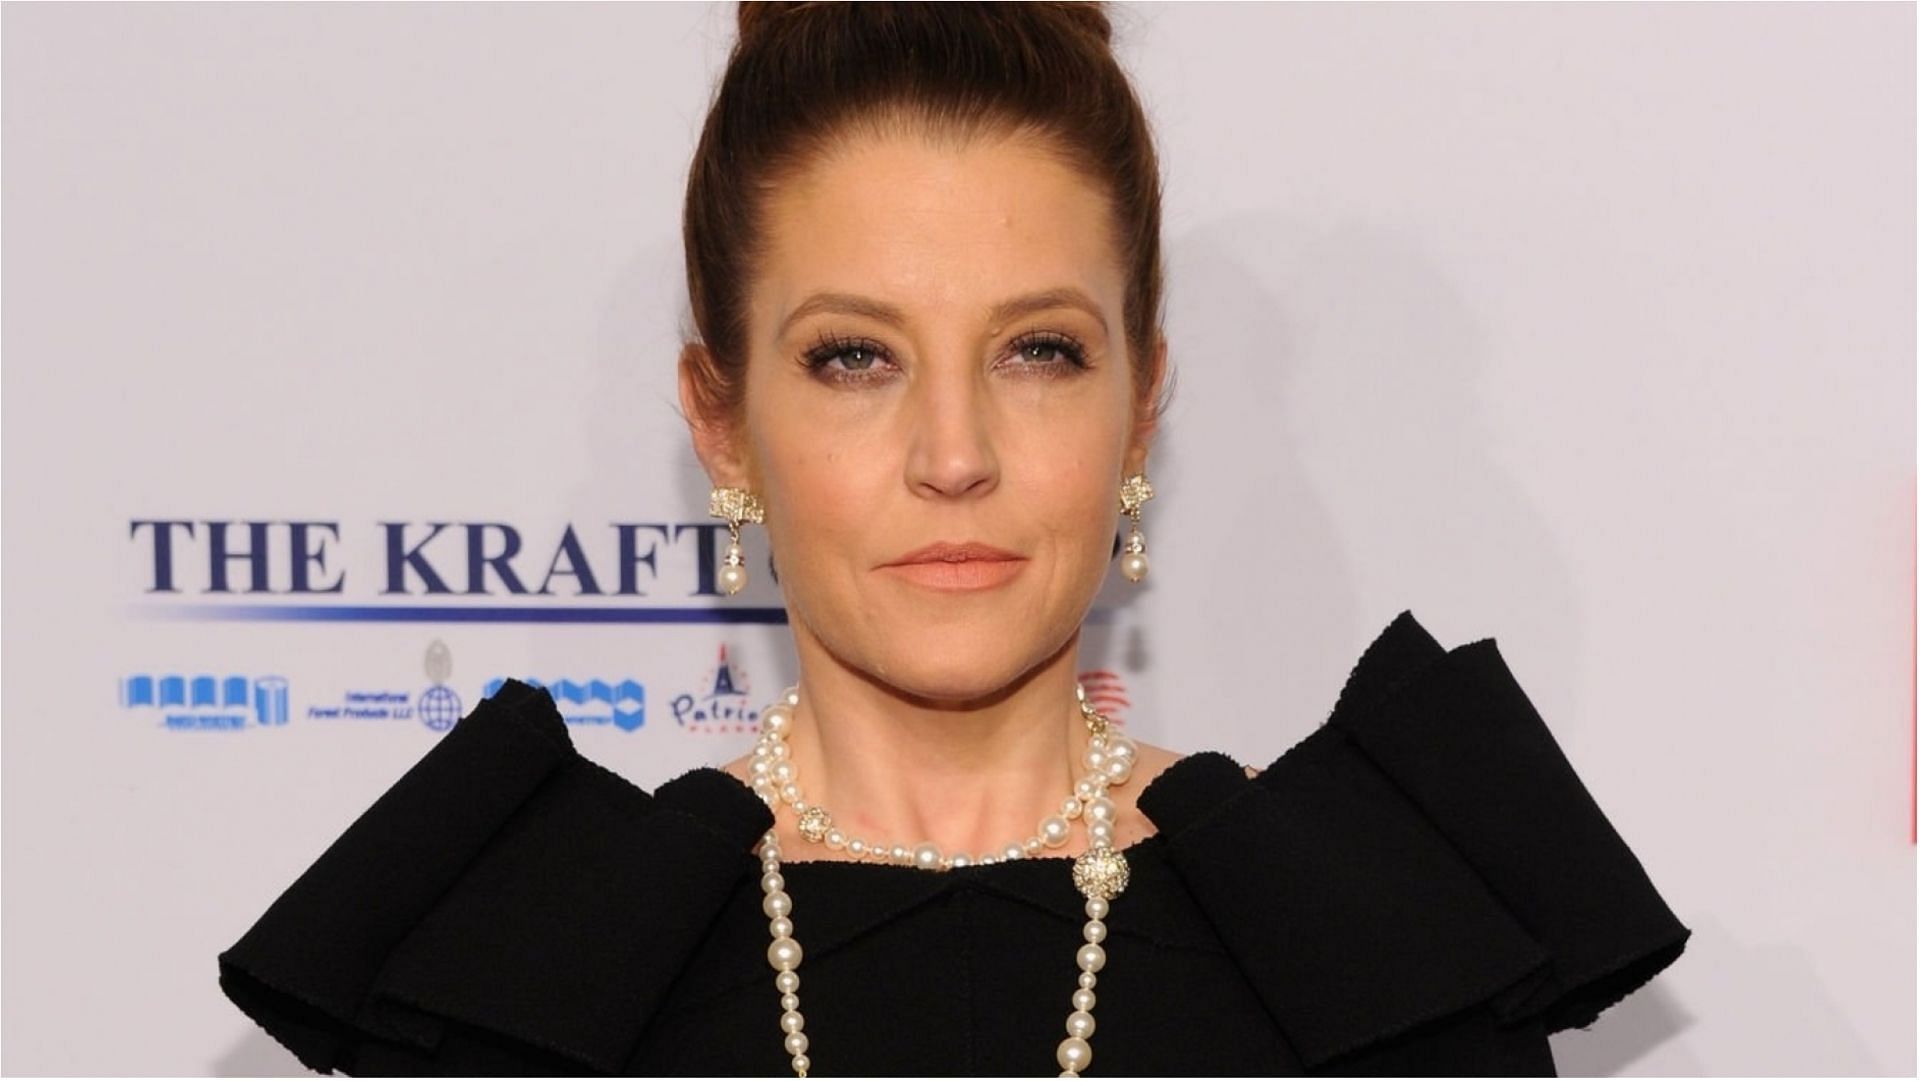 Lisa Marie Presley was in a lot of debt before her death (Image via Dimitrios Kambouris/Getty Images)